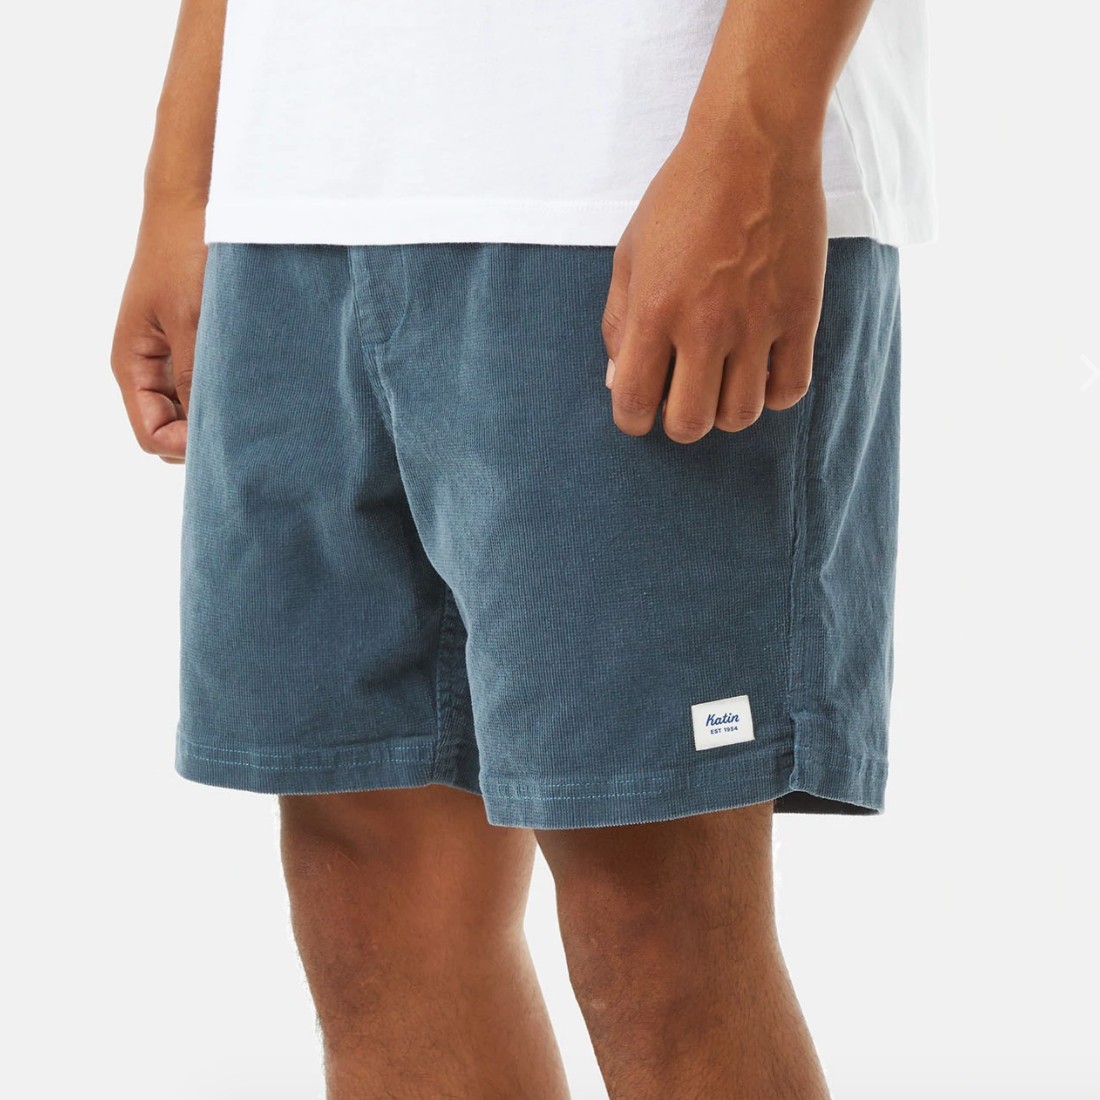 Short shorts for men are back this spring